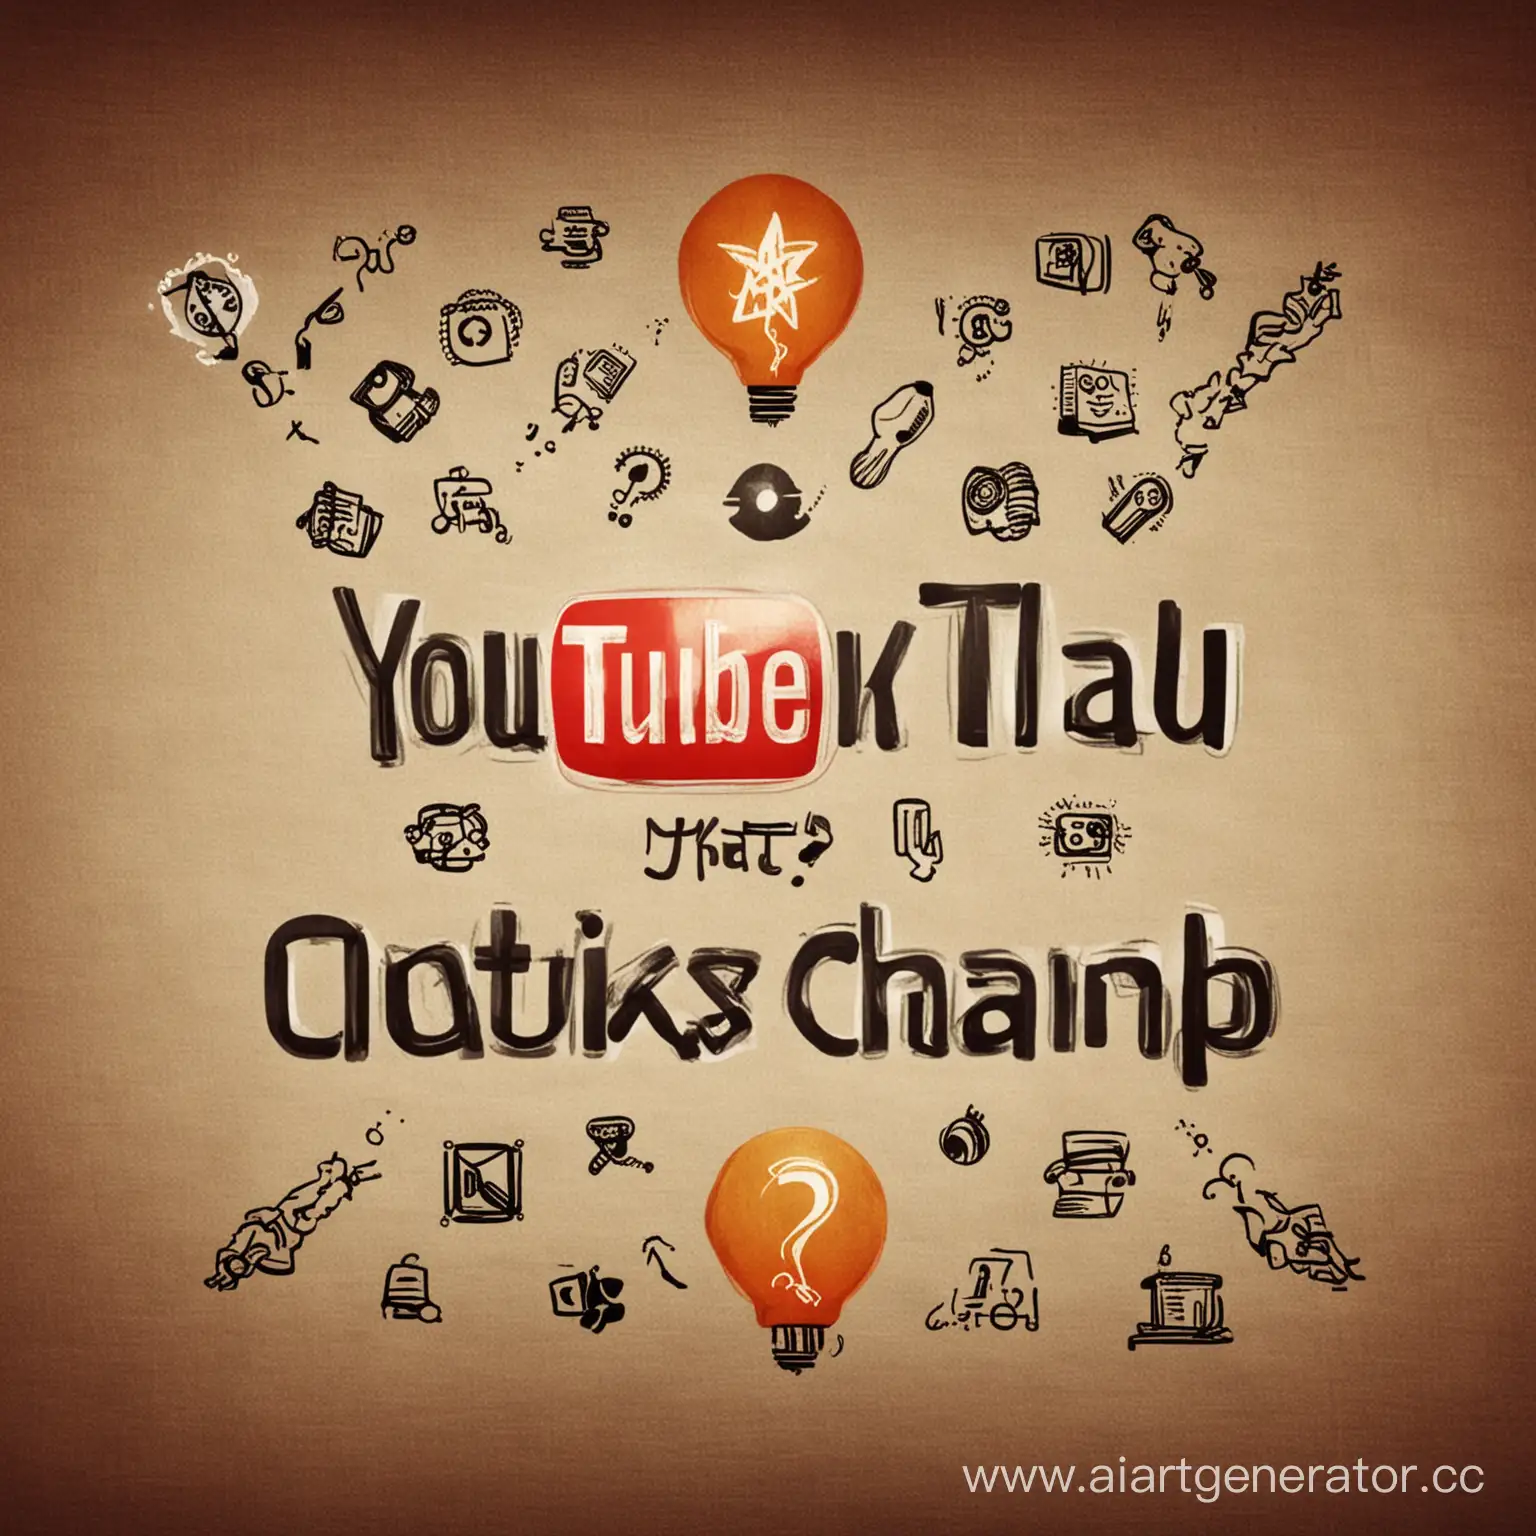 Logo-for-YouTube-Channel-Do-You-Know-That-Featuring-Curious-Symbols-and-Questions